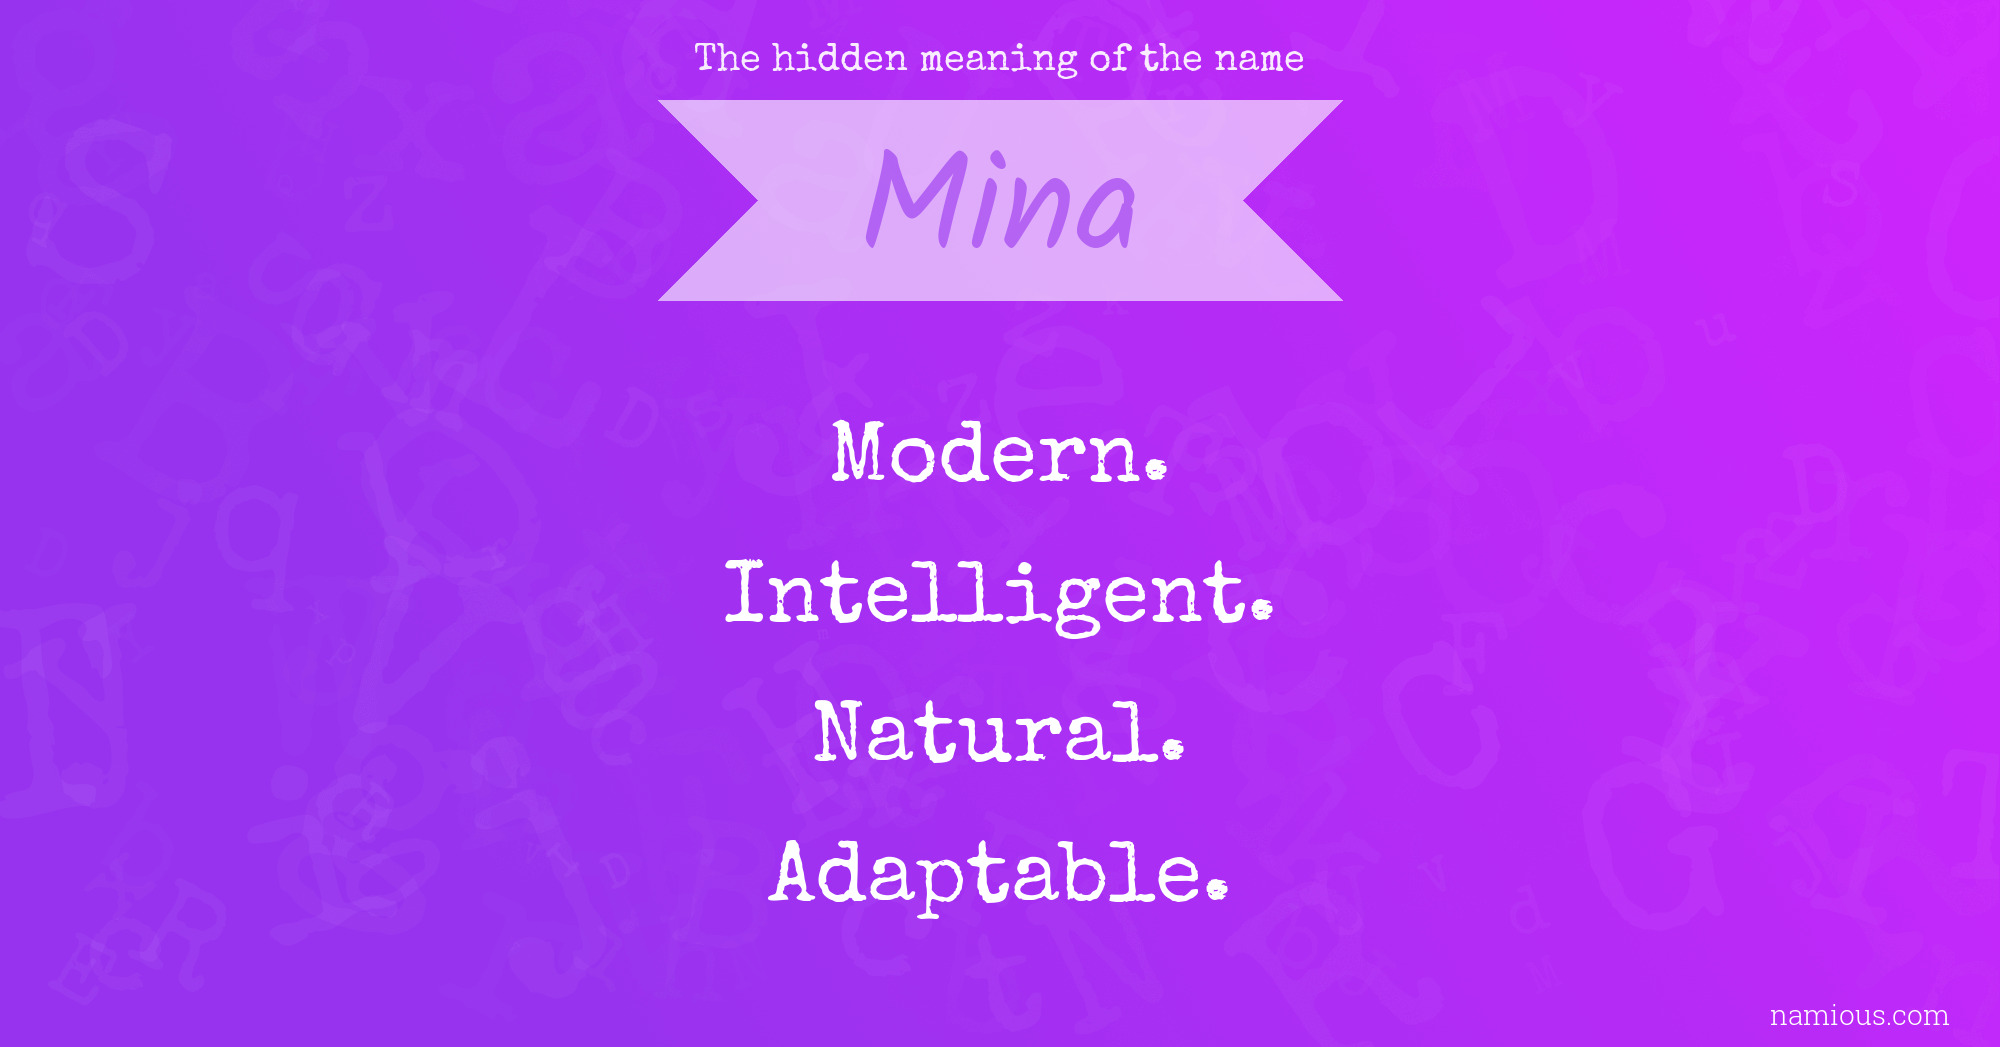 The hidden meaning of the name Mina